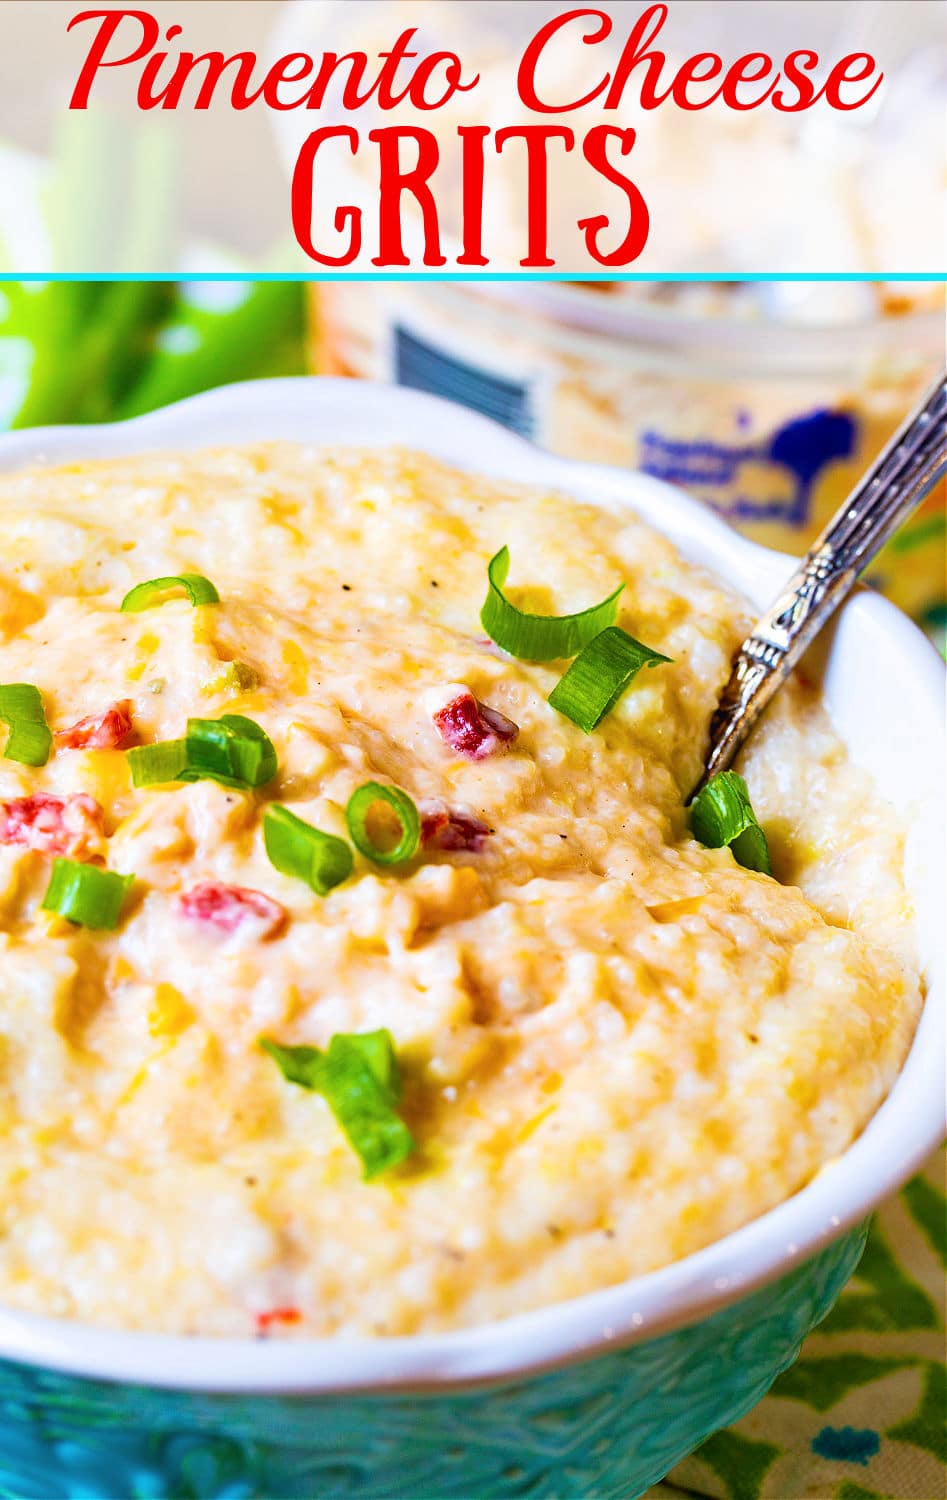 Pimento Cheese Grits in a blue bowl.